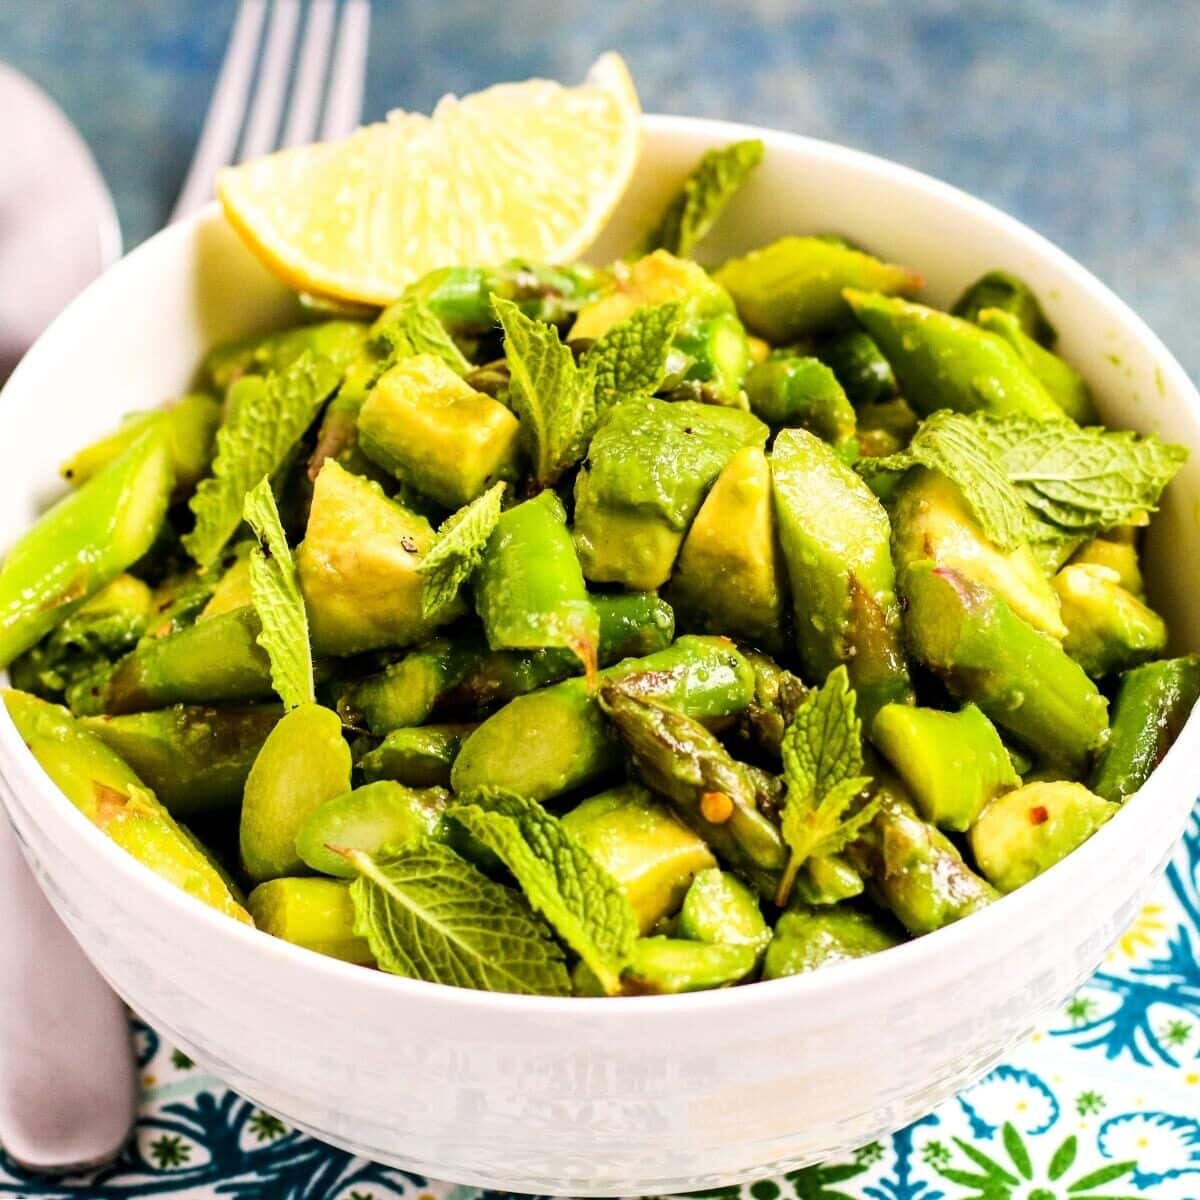 Bowl of Asparagus Avocado Salad garnished with a lime wedge.